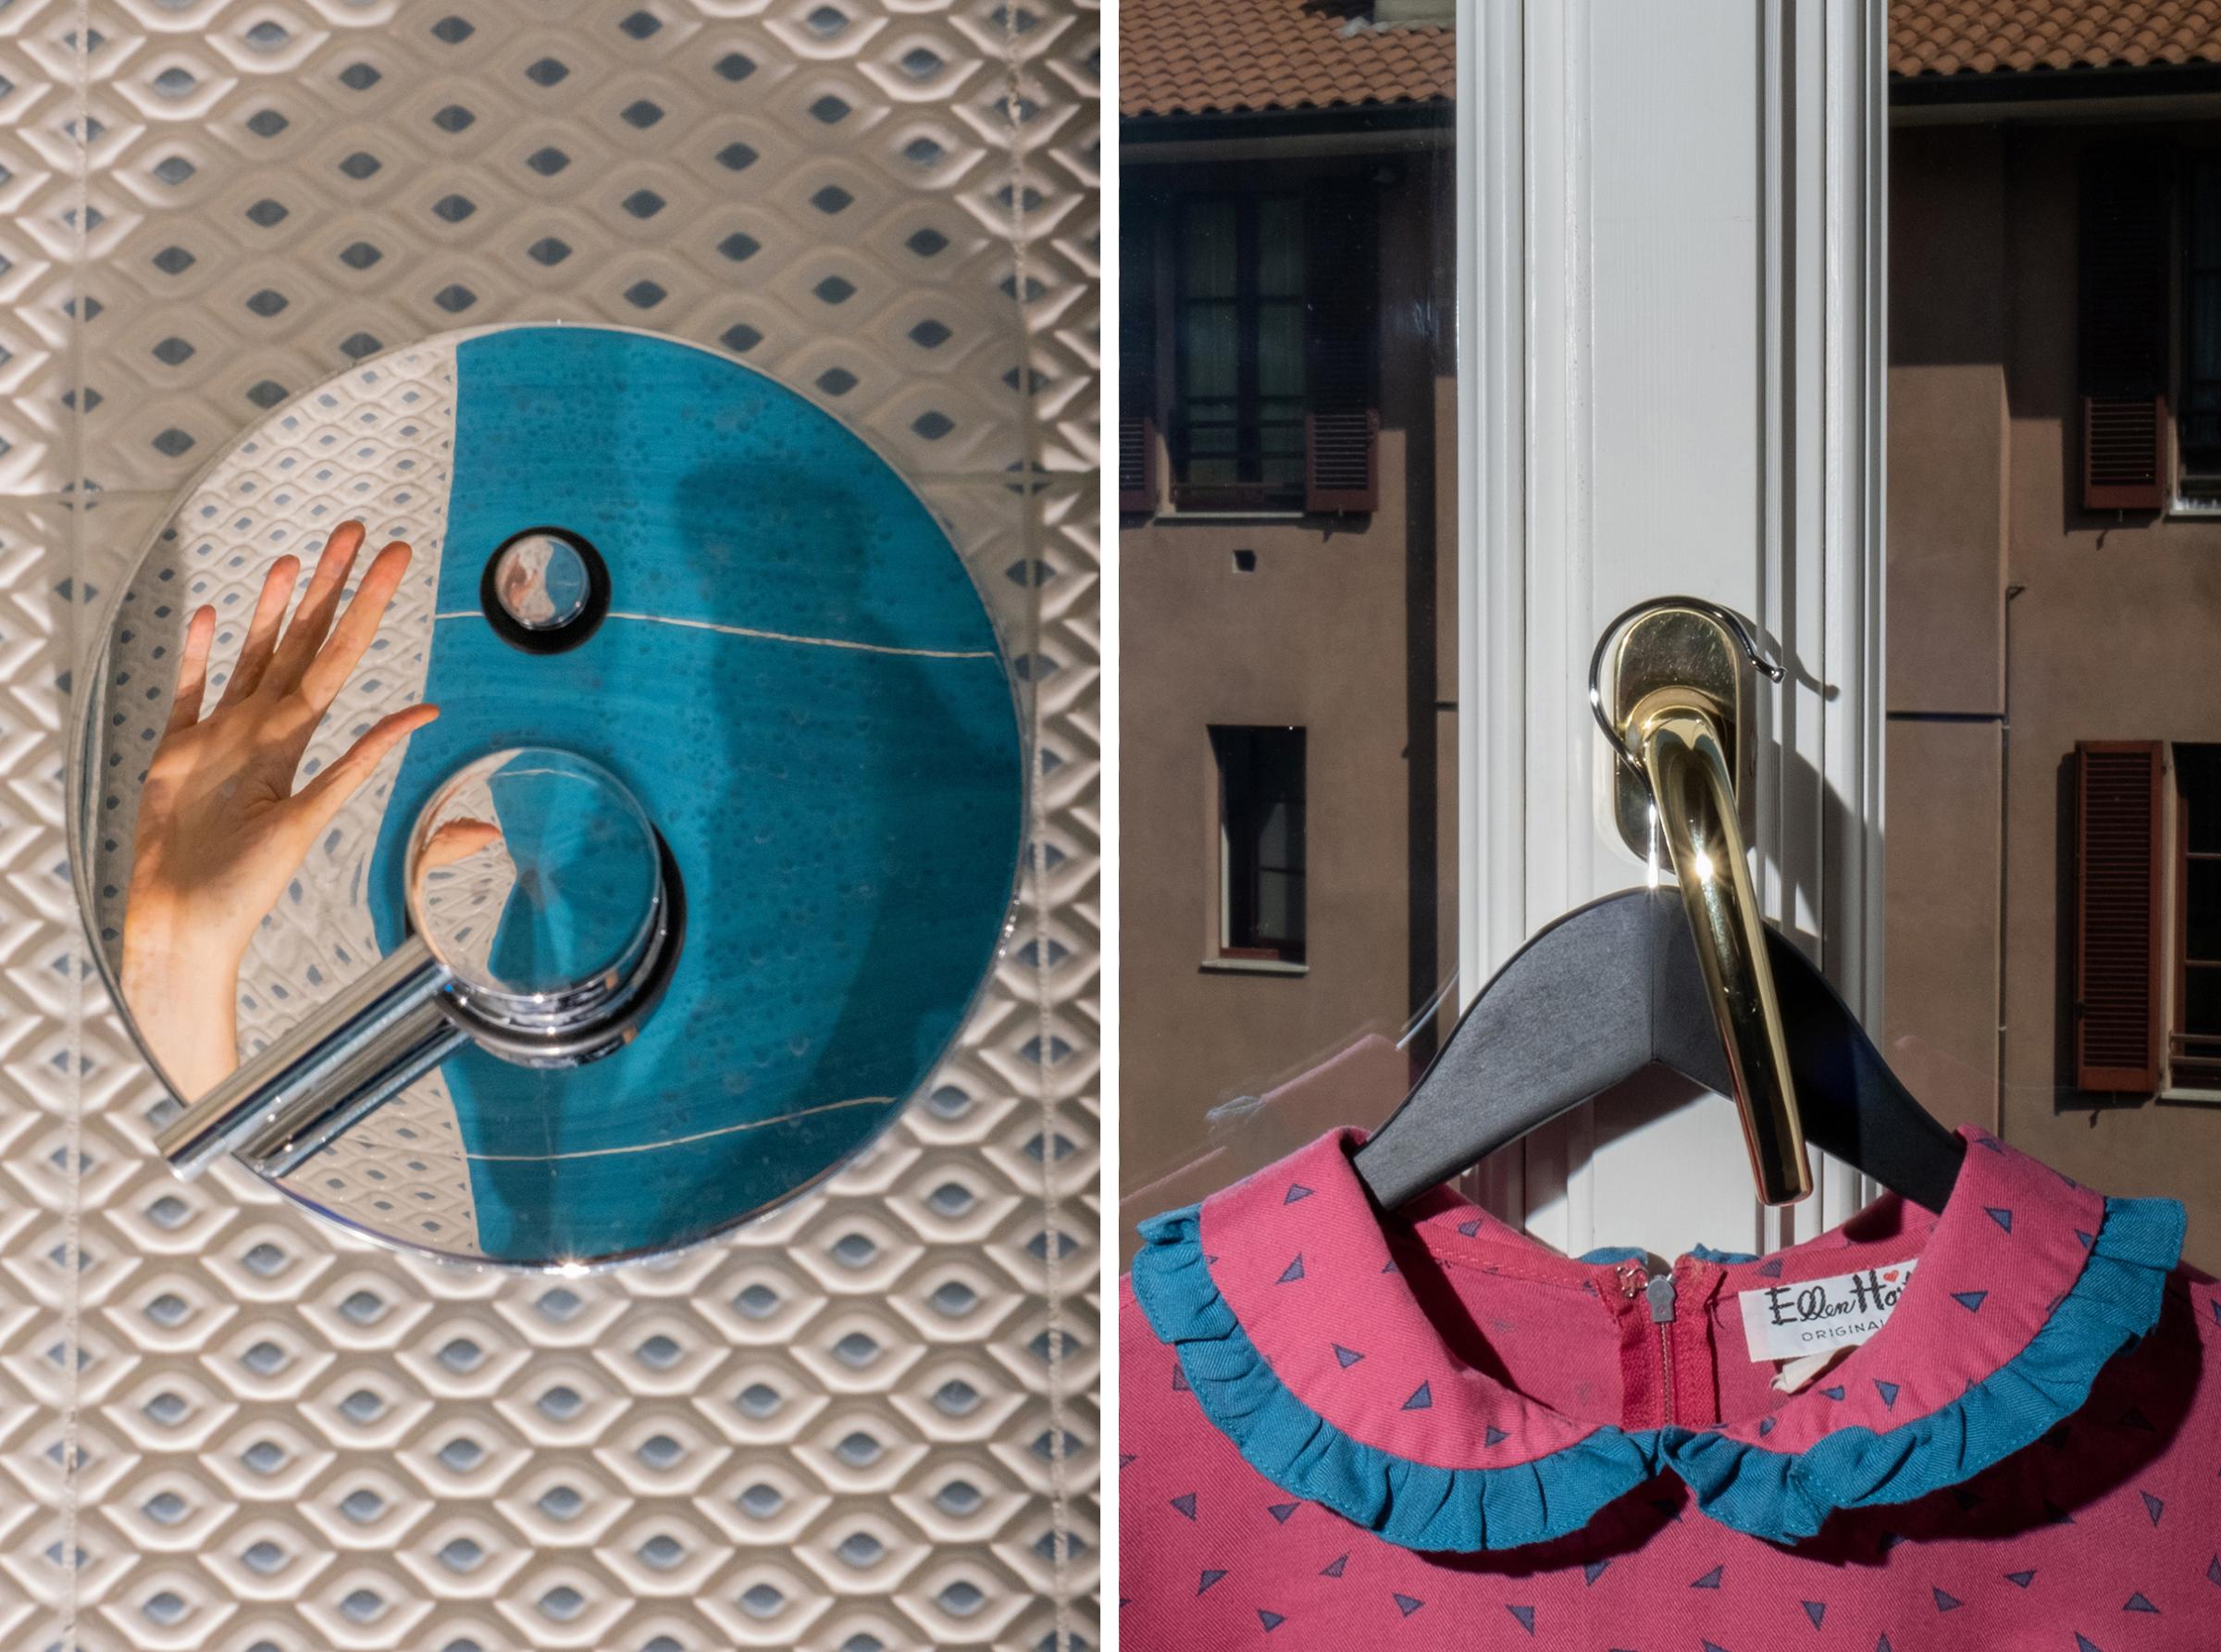 Left: 11.50 am bathroom details. Right: 12.36 pm detail of a dress on the bedroom window.